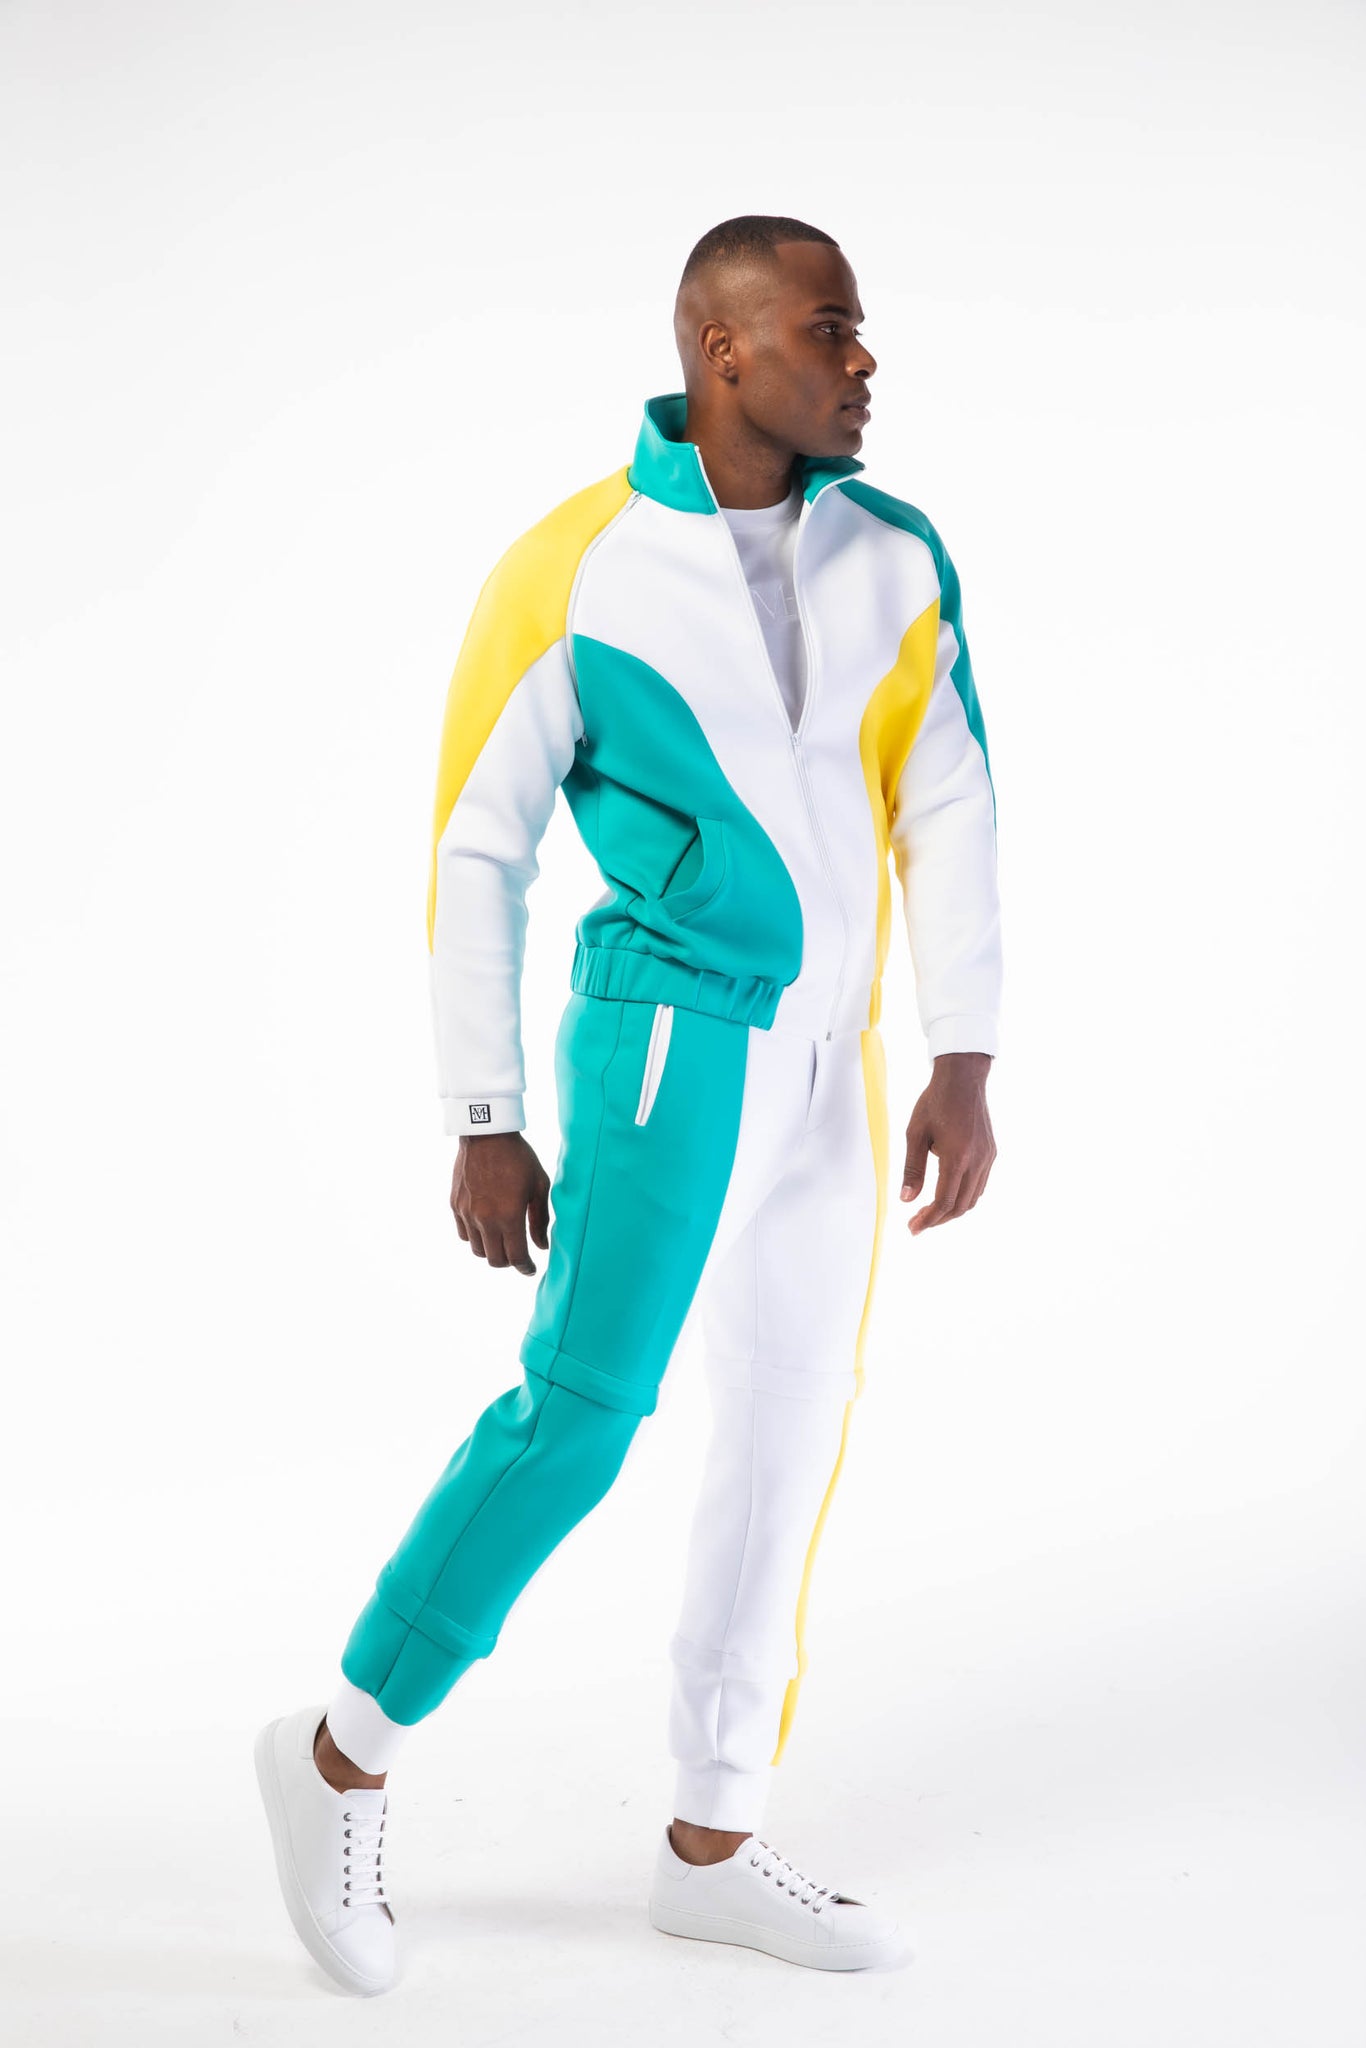 DM 500 F.I.T.S  TRACKSUIT TEAL,YELLOW, WHITE